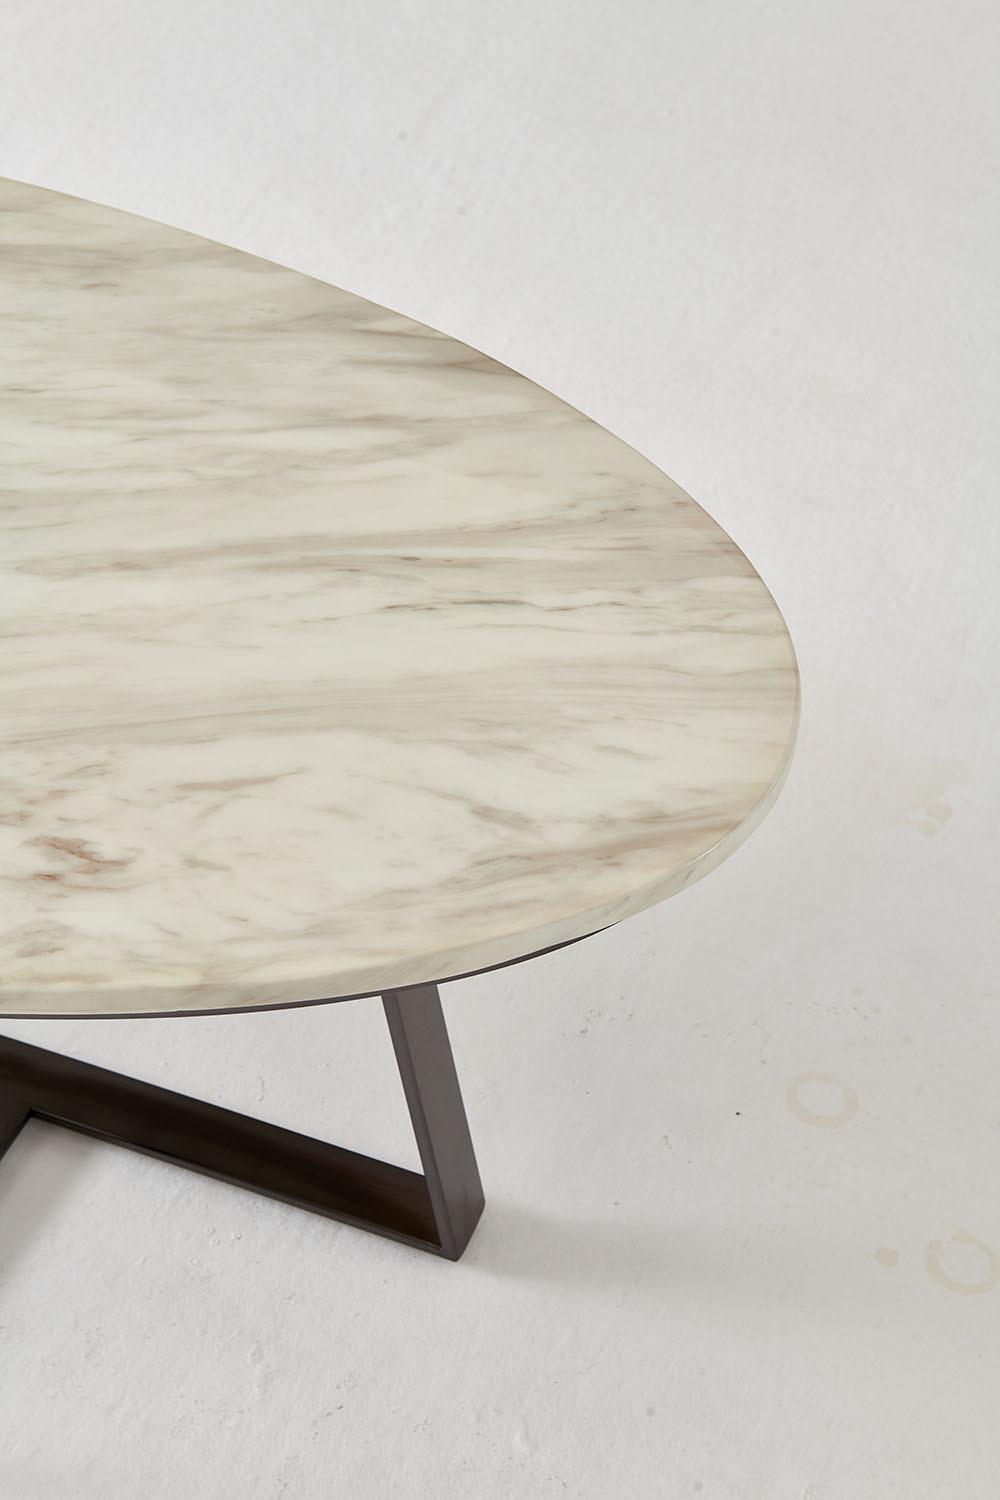 Office Furniture Countertop Marble Sintered Stone Coffee Table